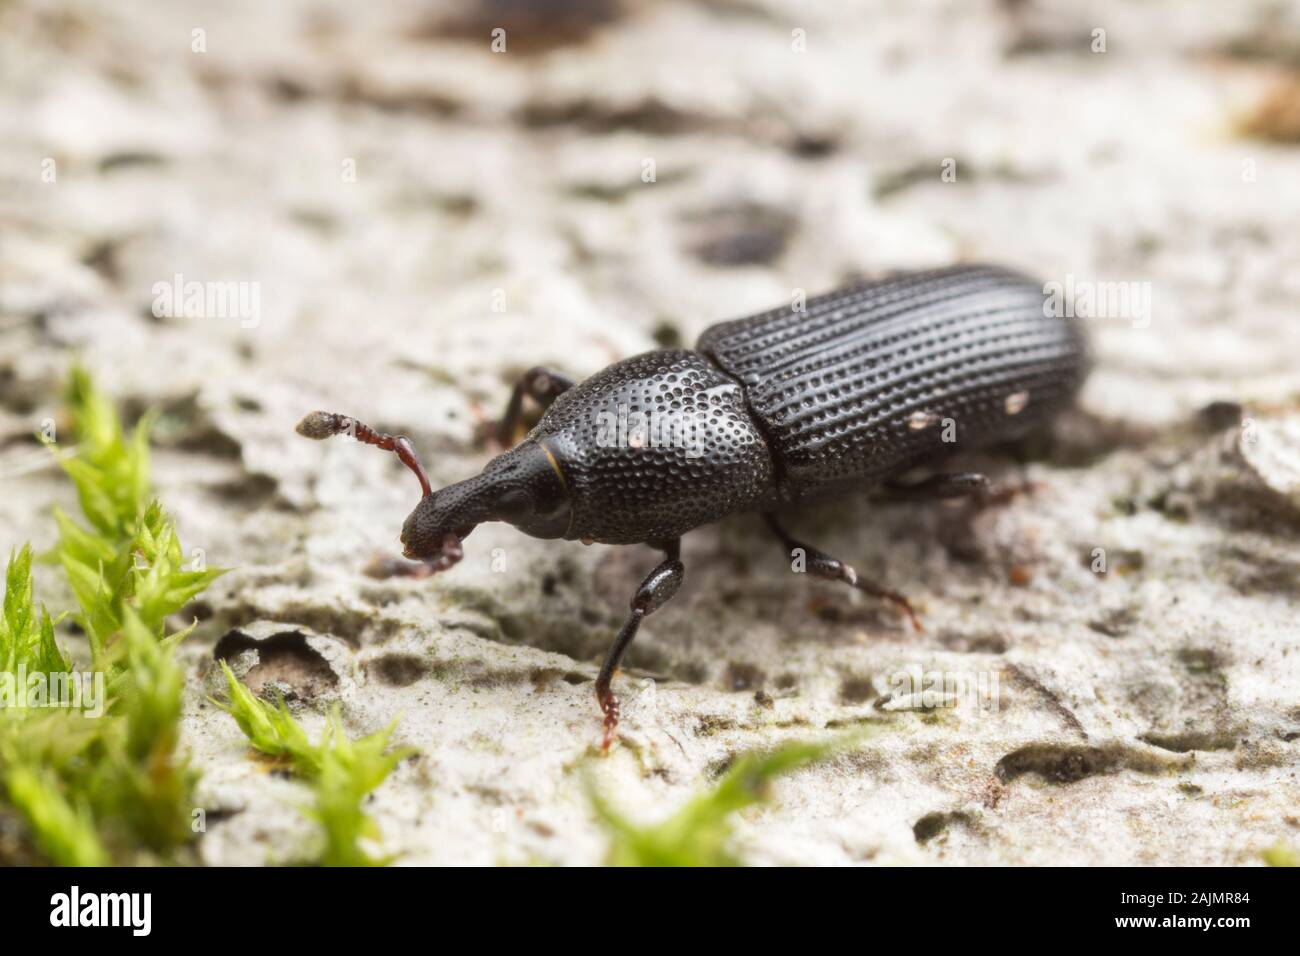 A weevil (Cossonus corticola) explores the surface of a decaying log. Stock Photo